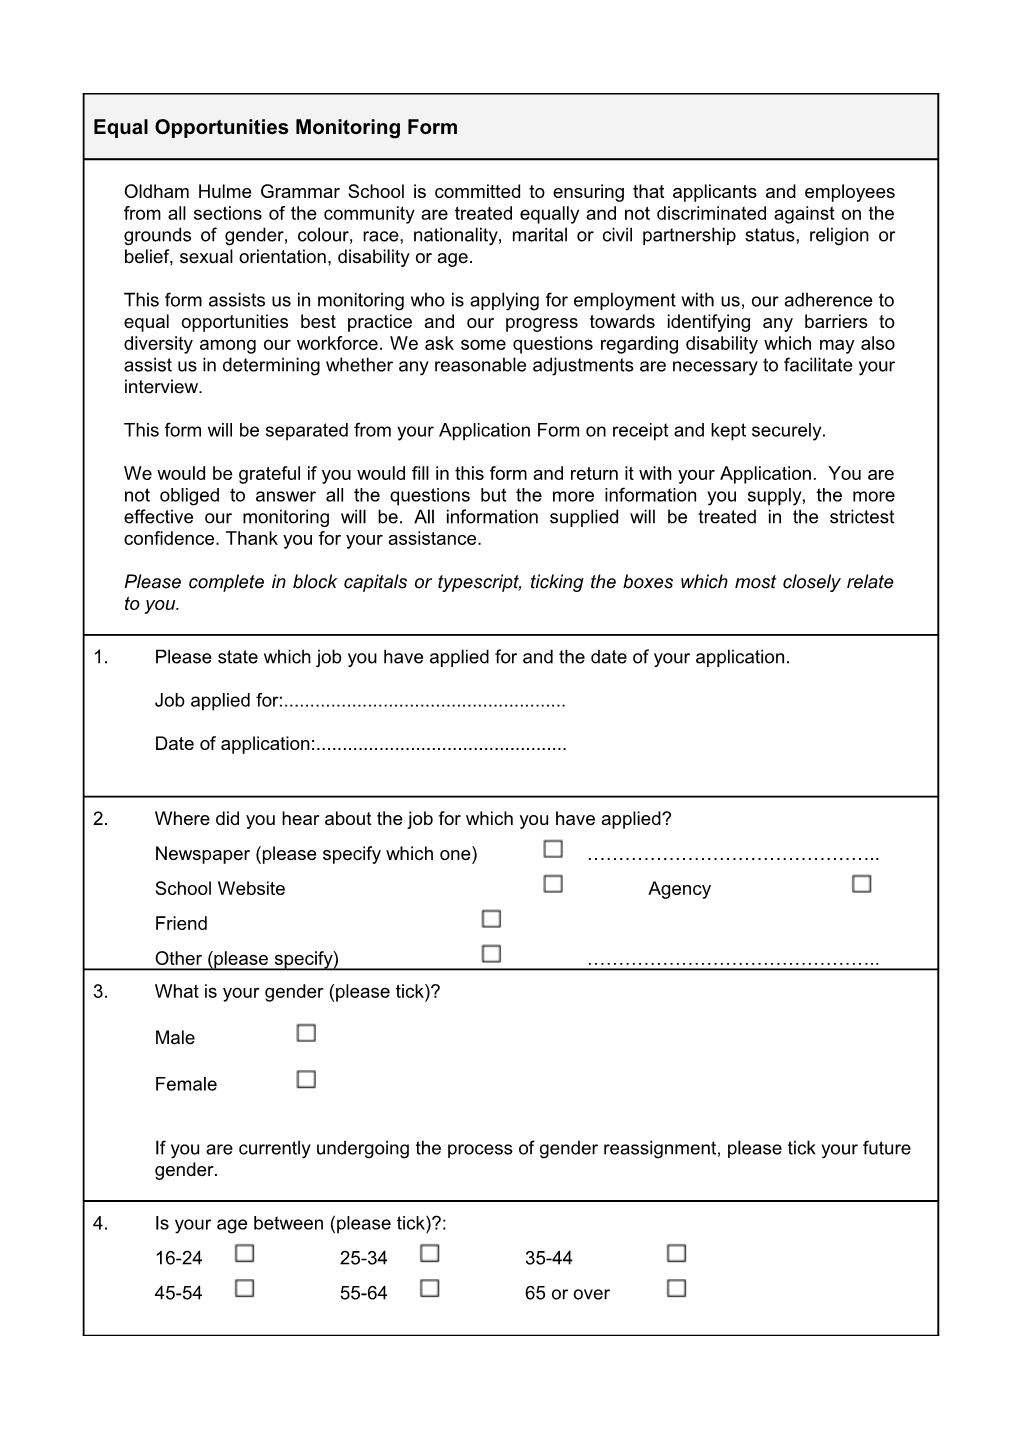 Equal Opportunities Monitoring Form s7